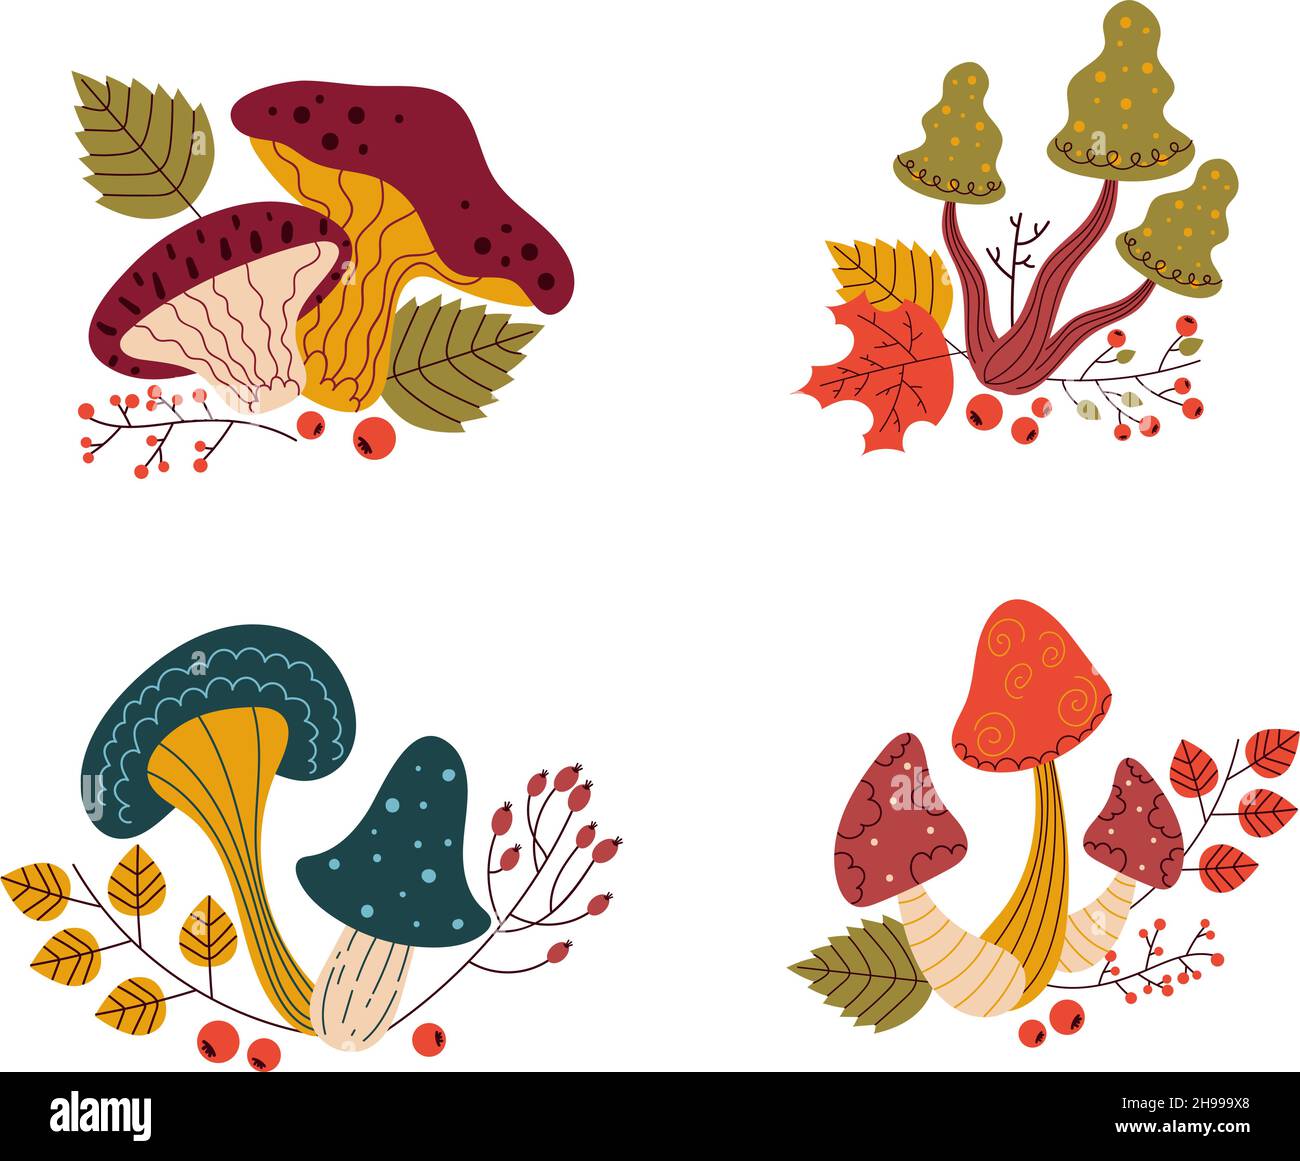 Mushrooms compositions. Cartoon forest funguses with twigs, berries and leaves. Organic diet vegetable products. Autumn harvest. Poisonous or edible p Stock Vector